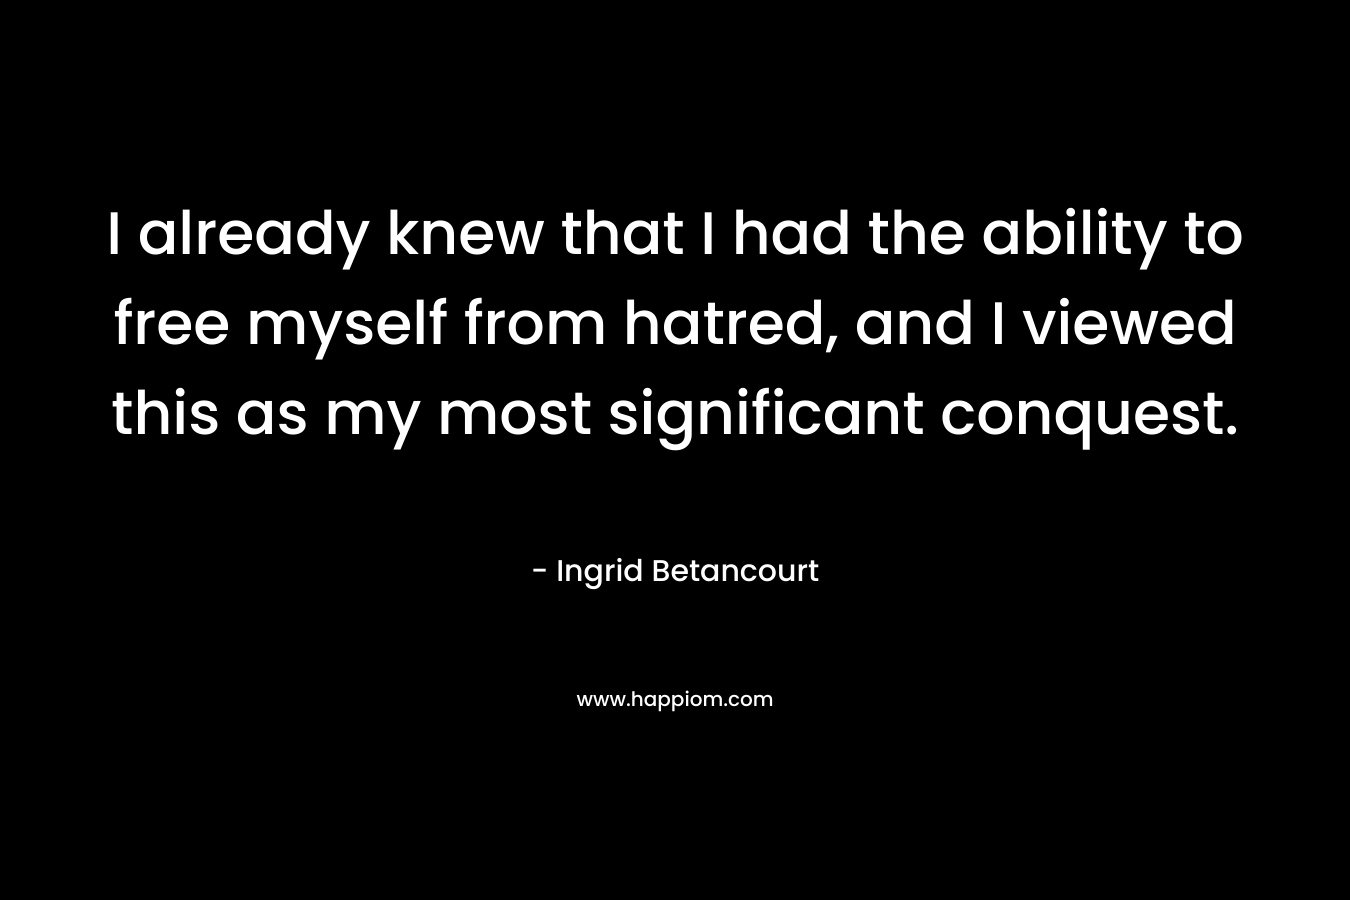 I already knew that I had the ability to free myself from hatred, and I viewed this as my most significant conquest.